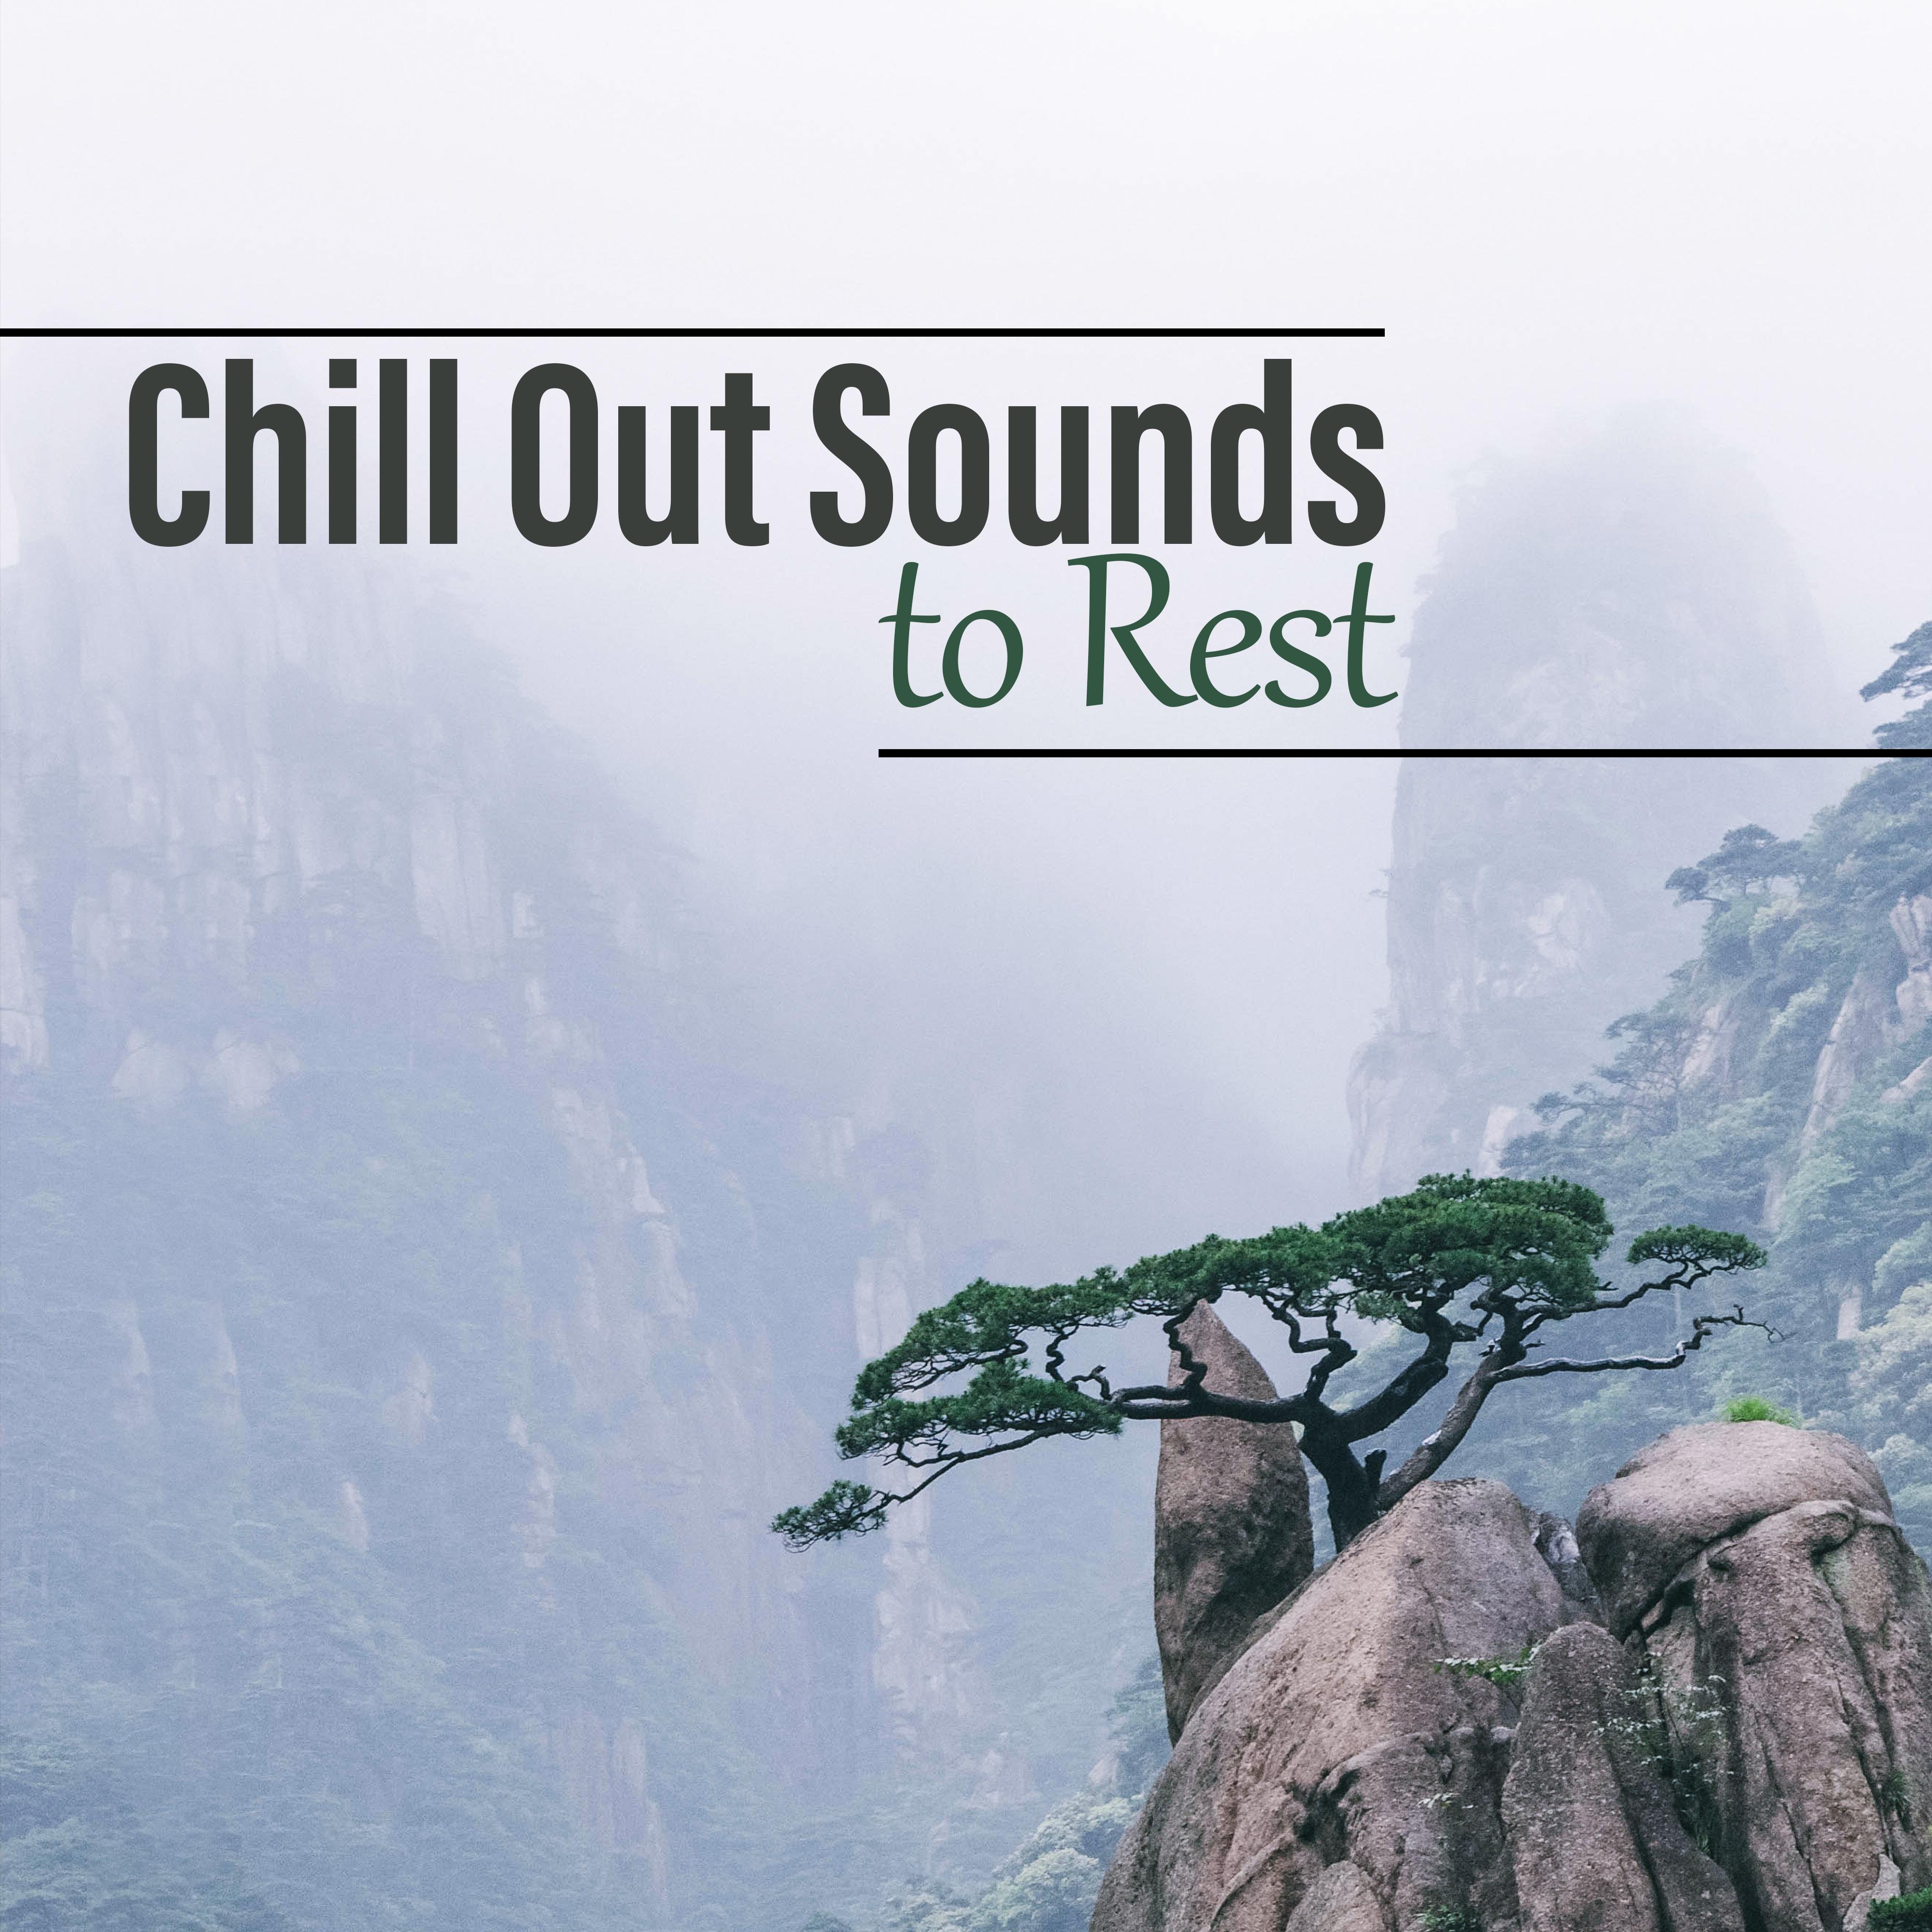 Chill Out Sounds to Rest